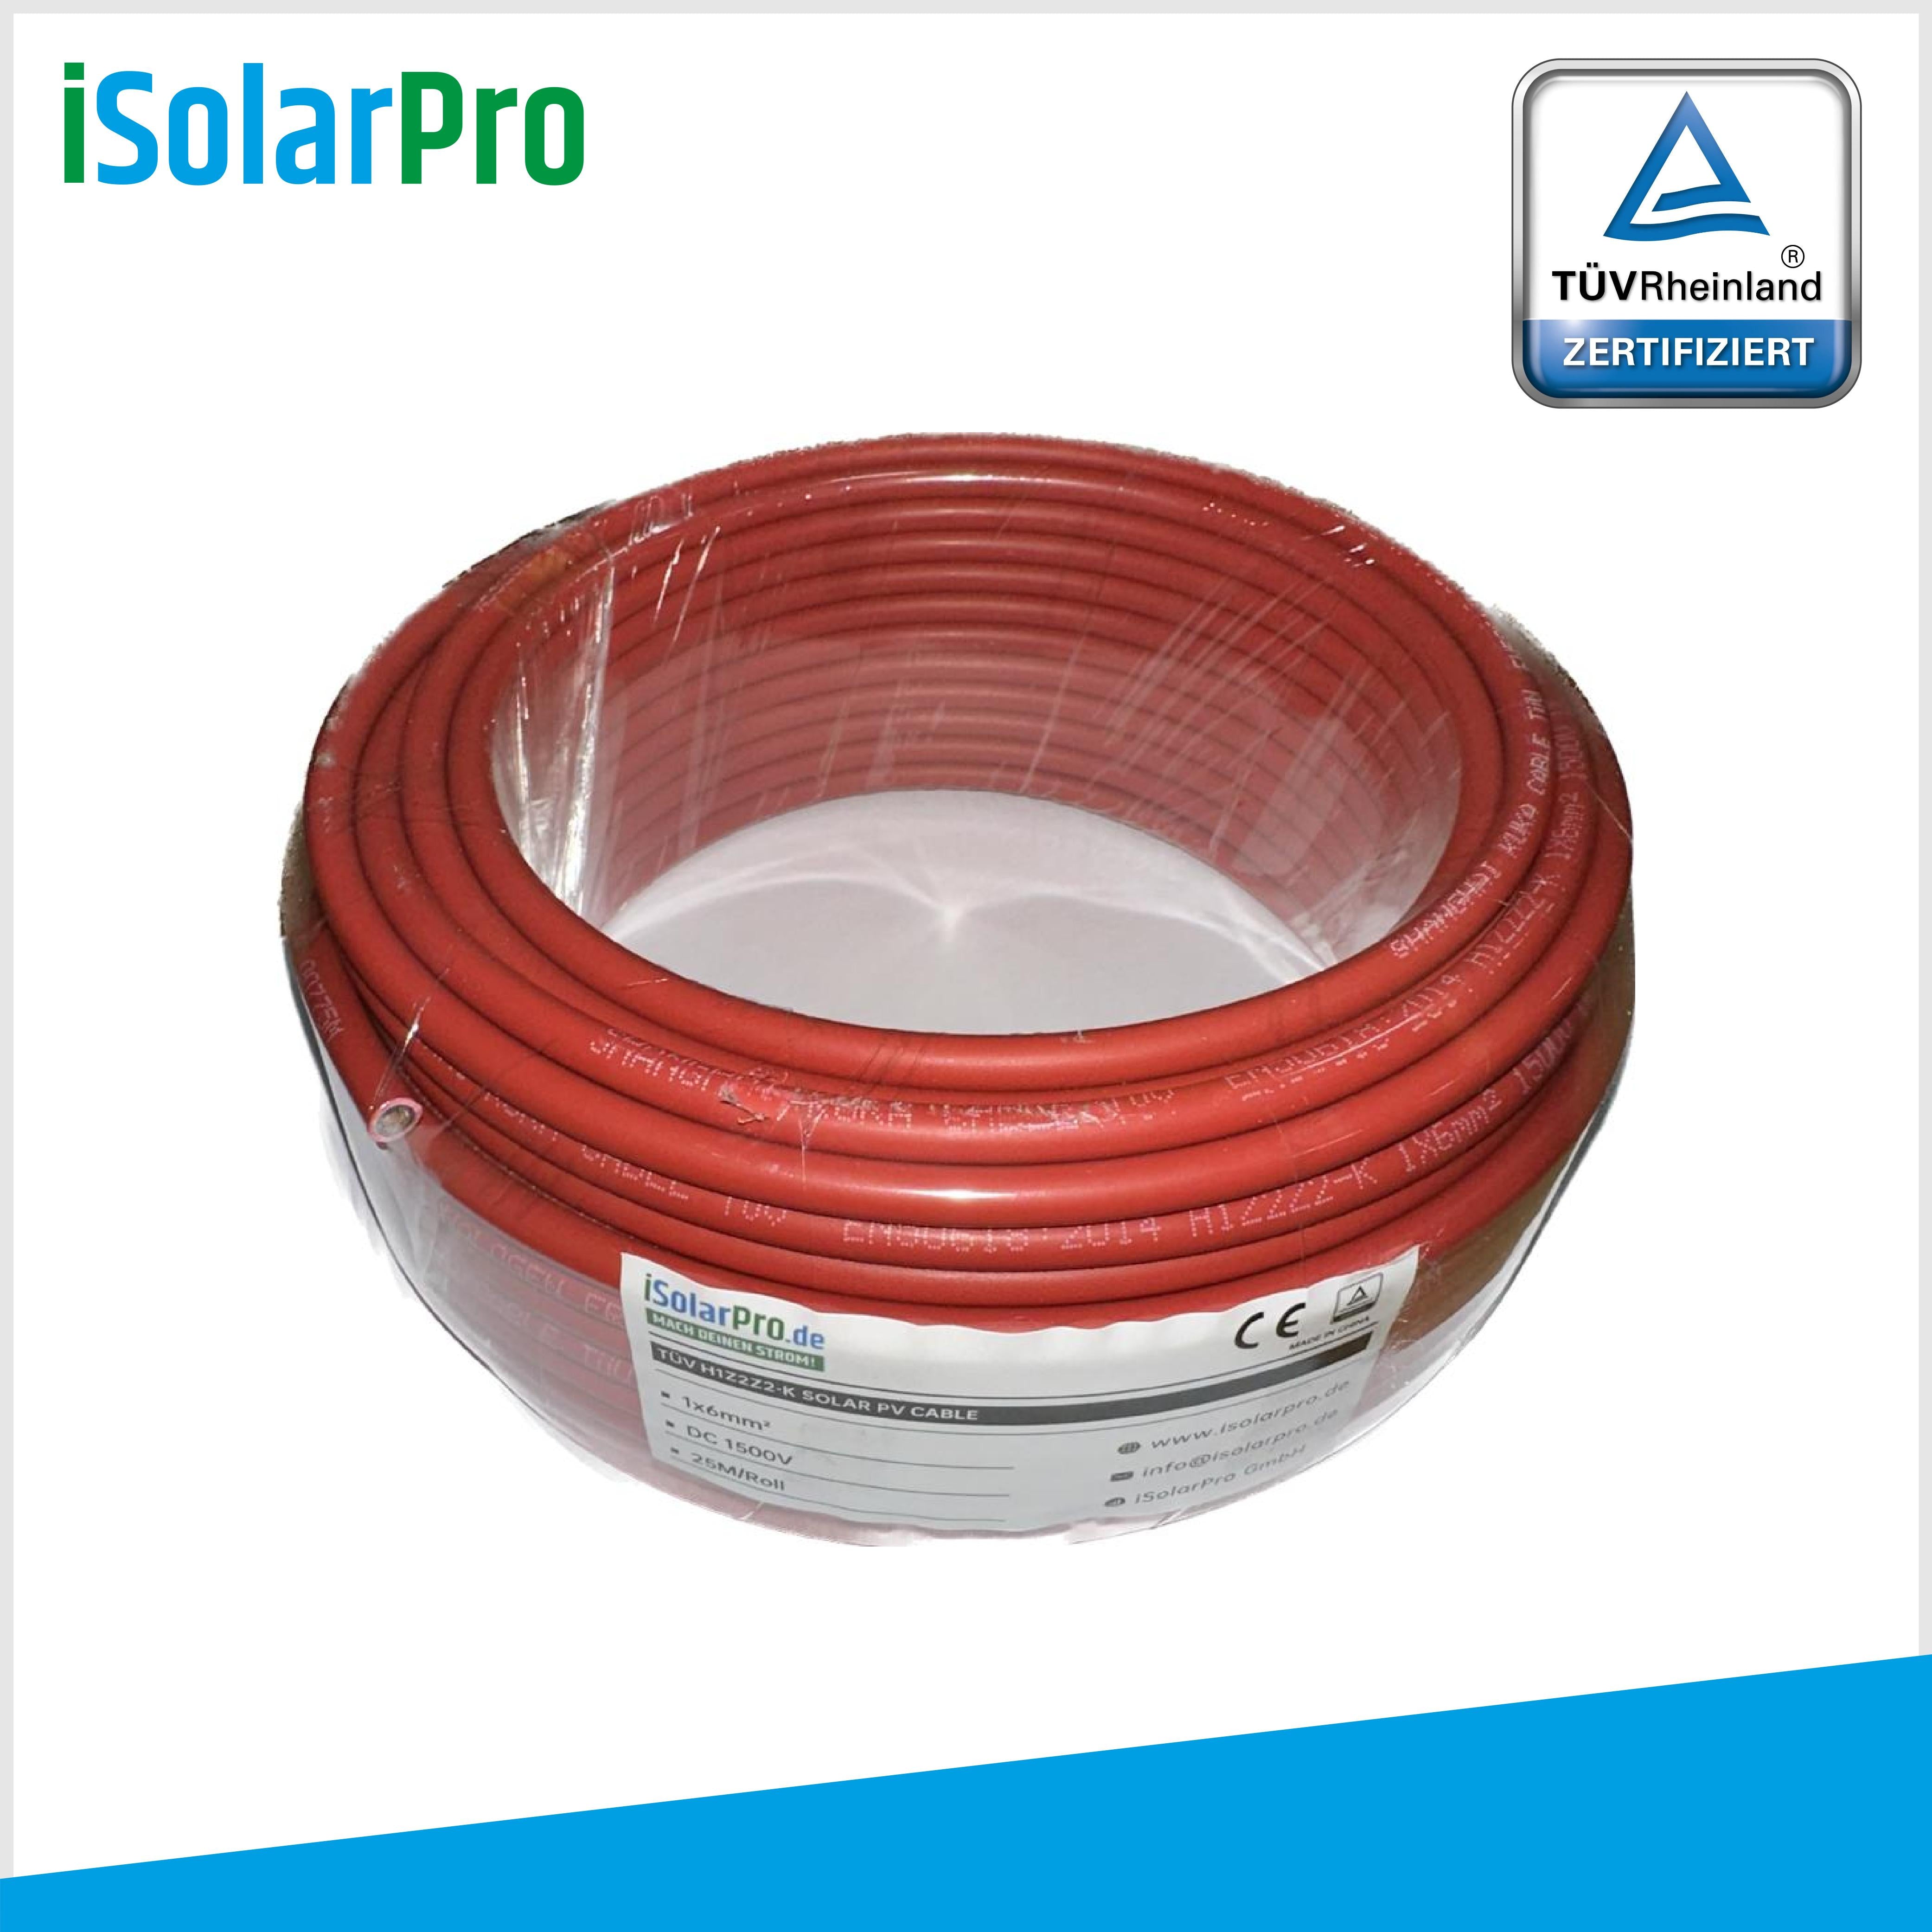 25m solar cable 6 mm² photovoltaic cable for PV systems red